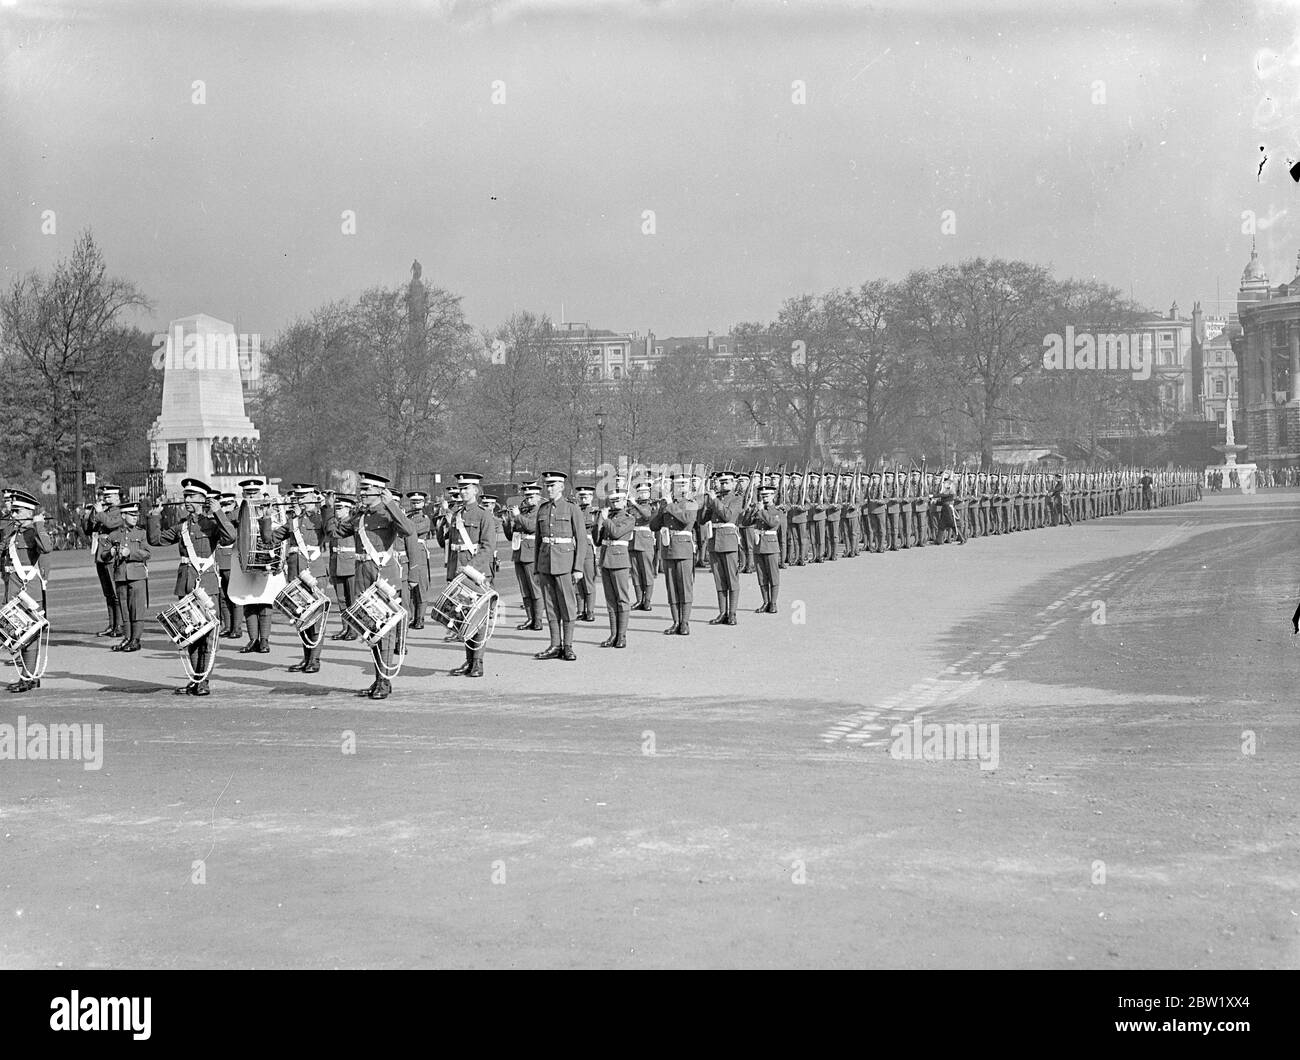 Coldstream Guards rehearse the trooping of the colour. Coldstream Guards rehearsed for the trooping the colour ceremony, to take place in June, on the Horse Guards Parade. Photo shows, Coldstream Guards parading at the rehearsal. 6 May 1937 Stock Photo